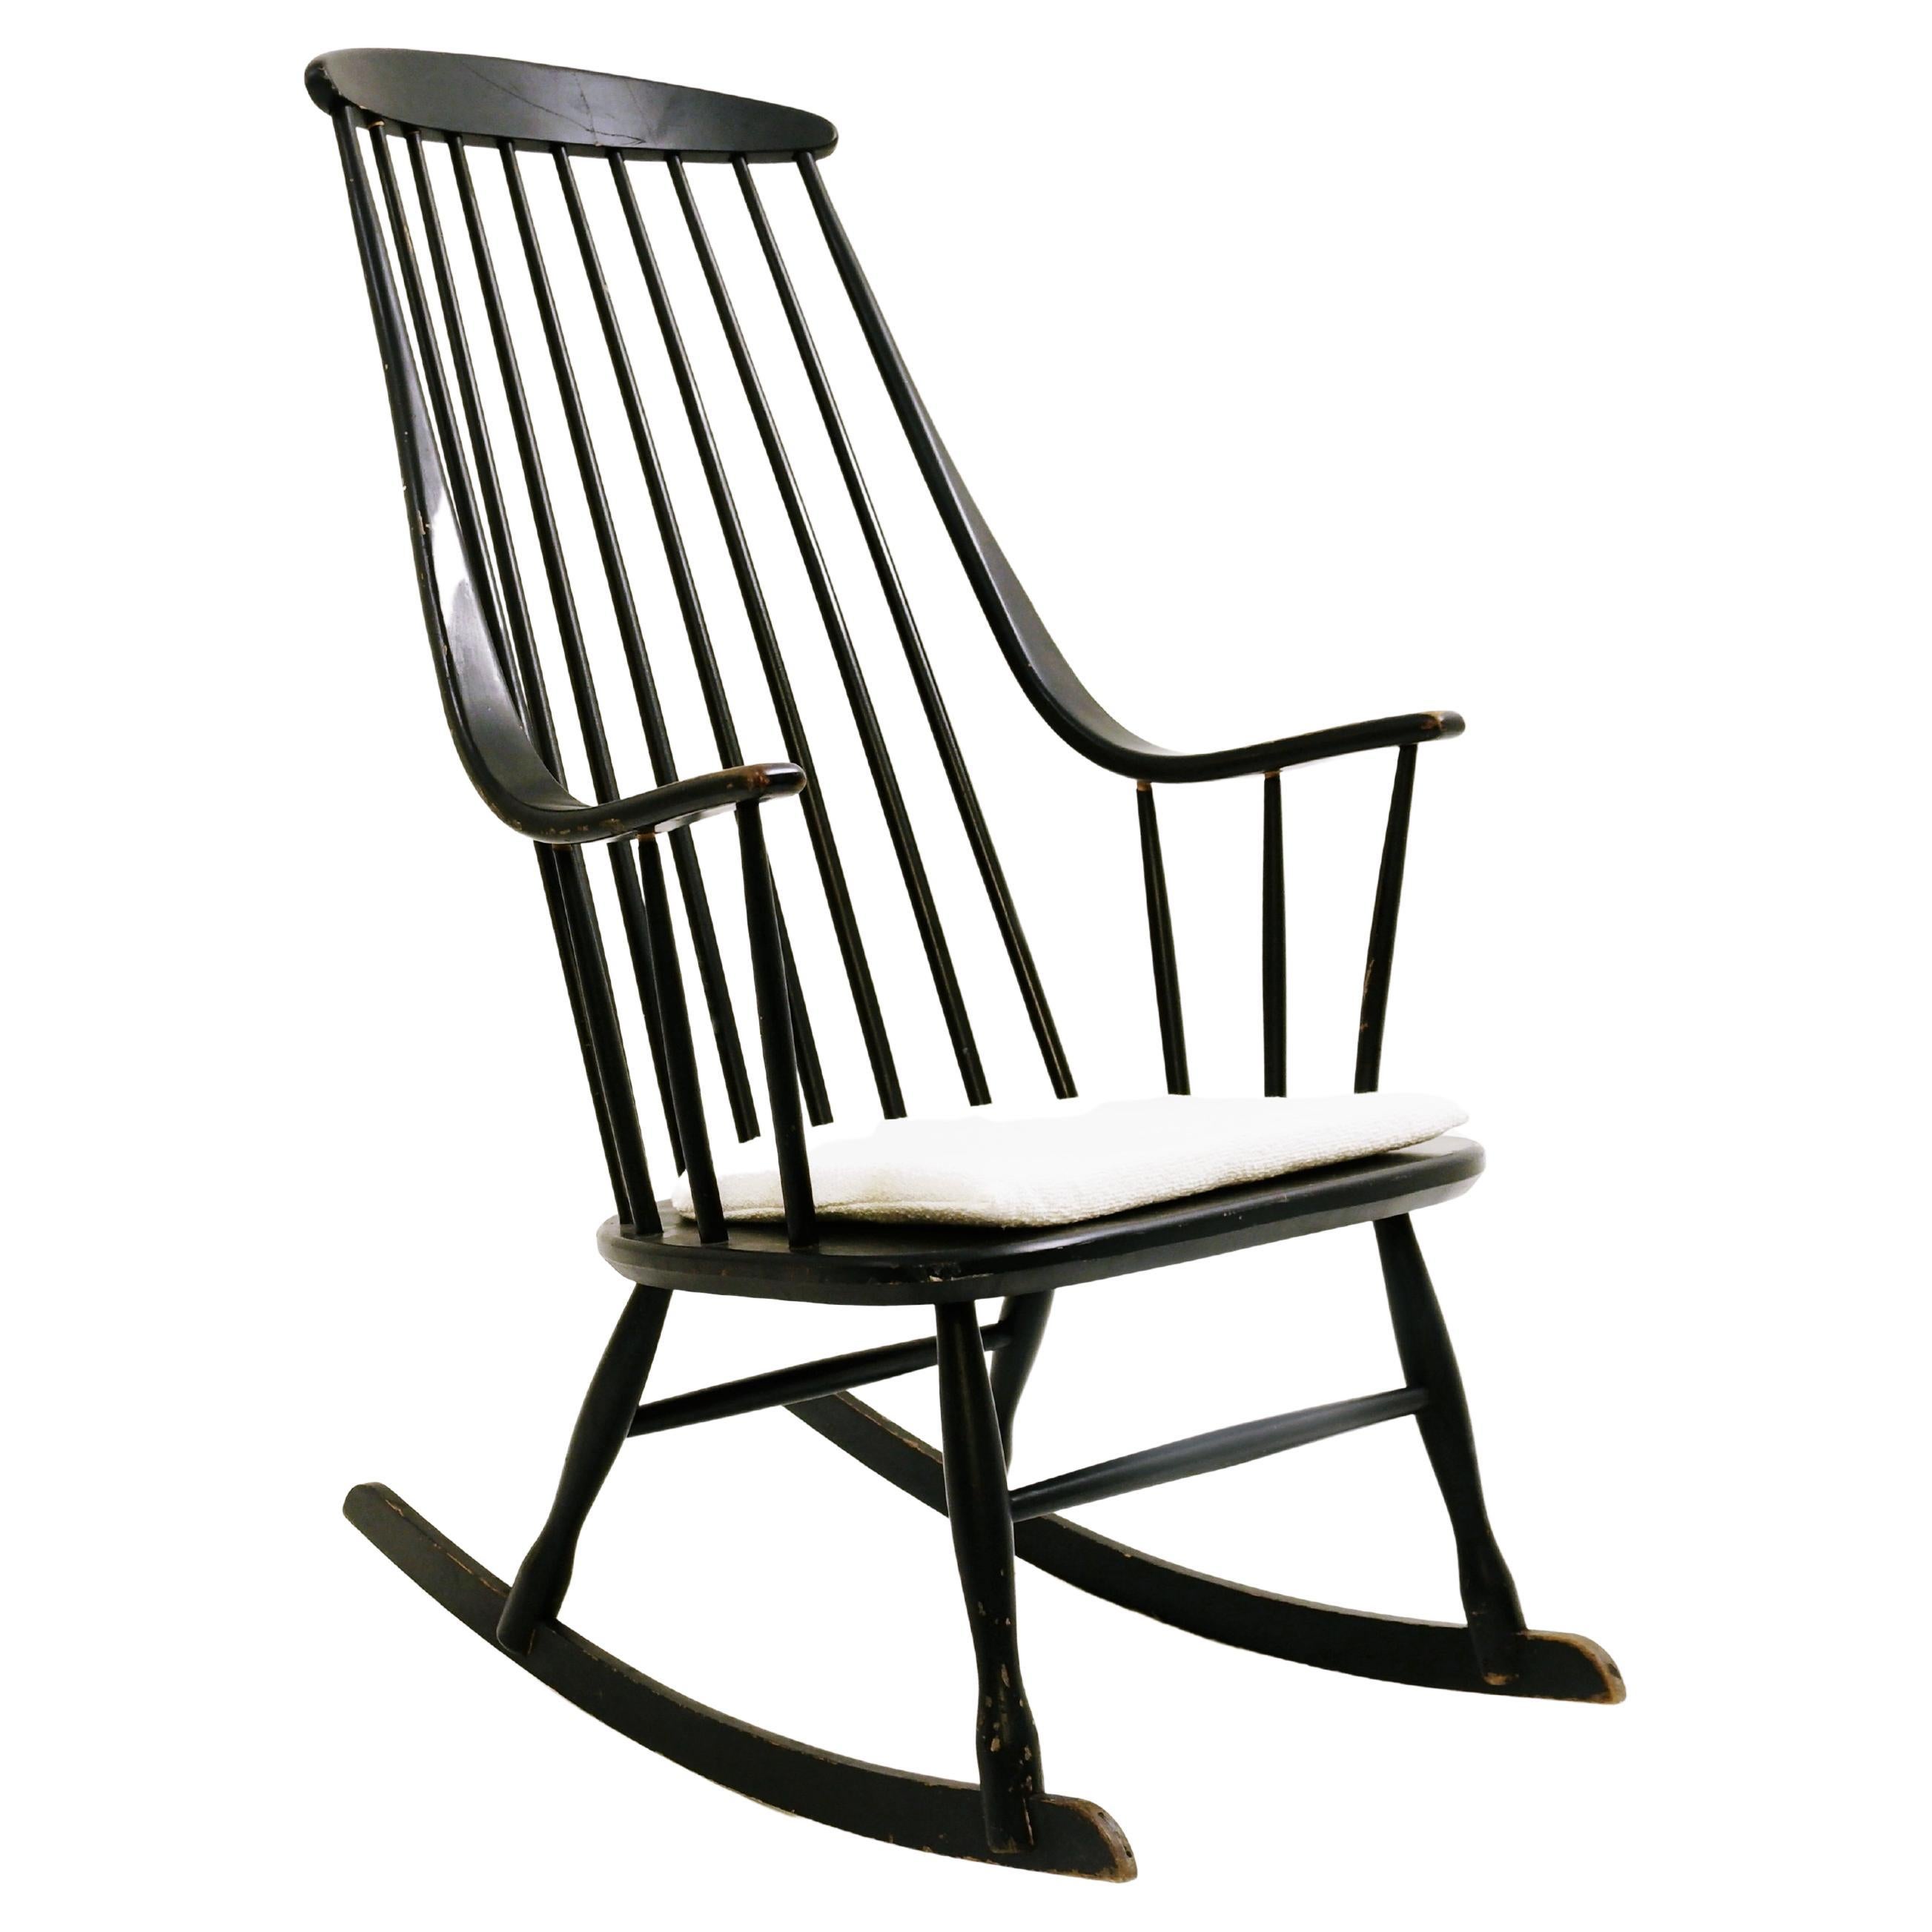 Midcentury Rocking Chair by Lena Larsson for Nesto, 1960s For Sale